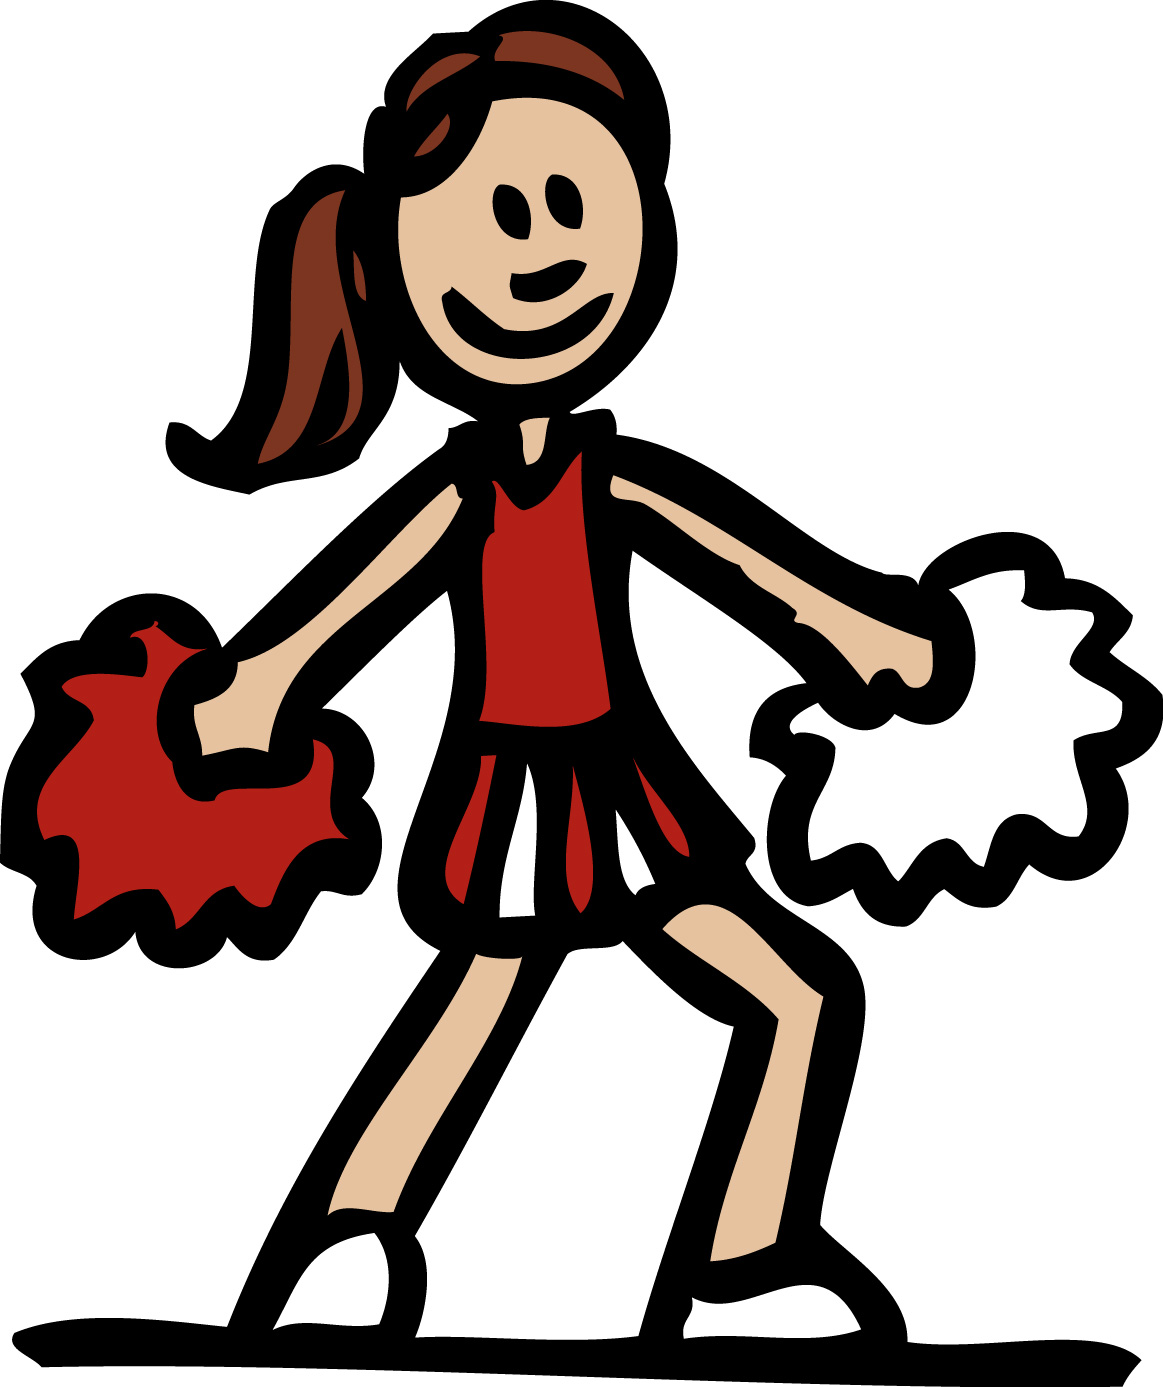 15 Clipart Of Cheerleaders Free Cliparts That You Can Download To You